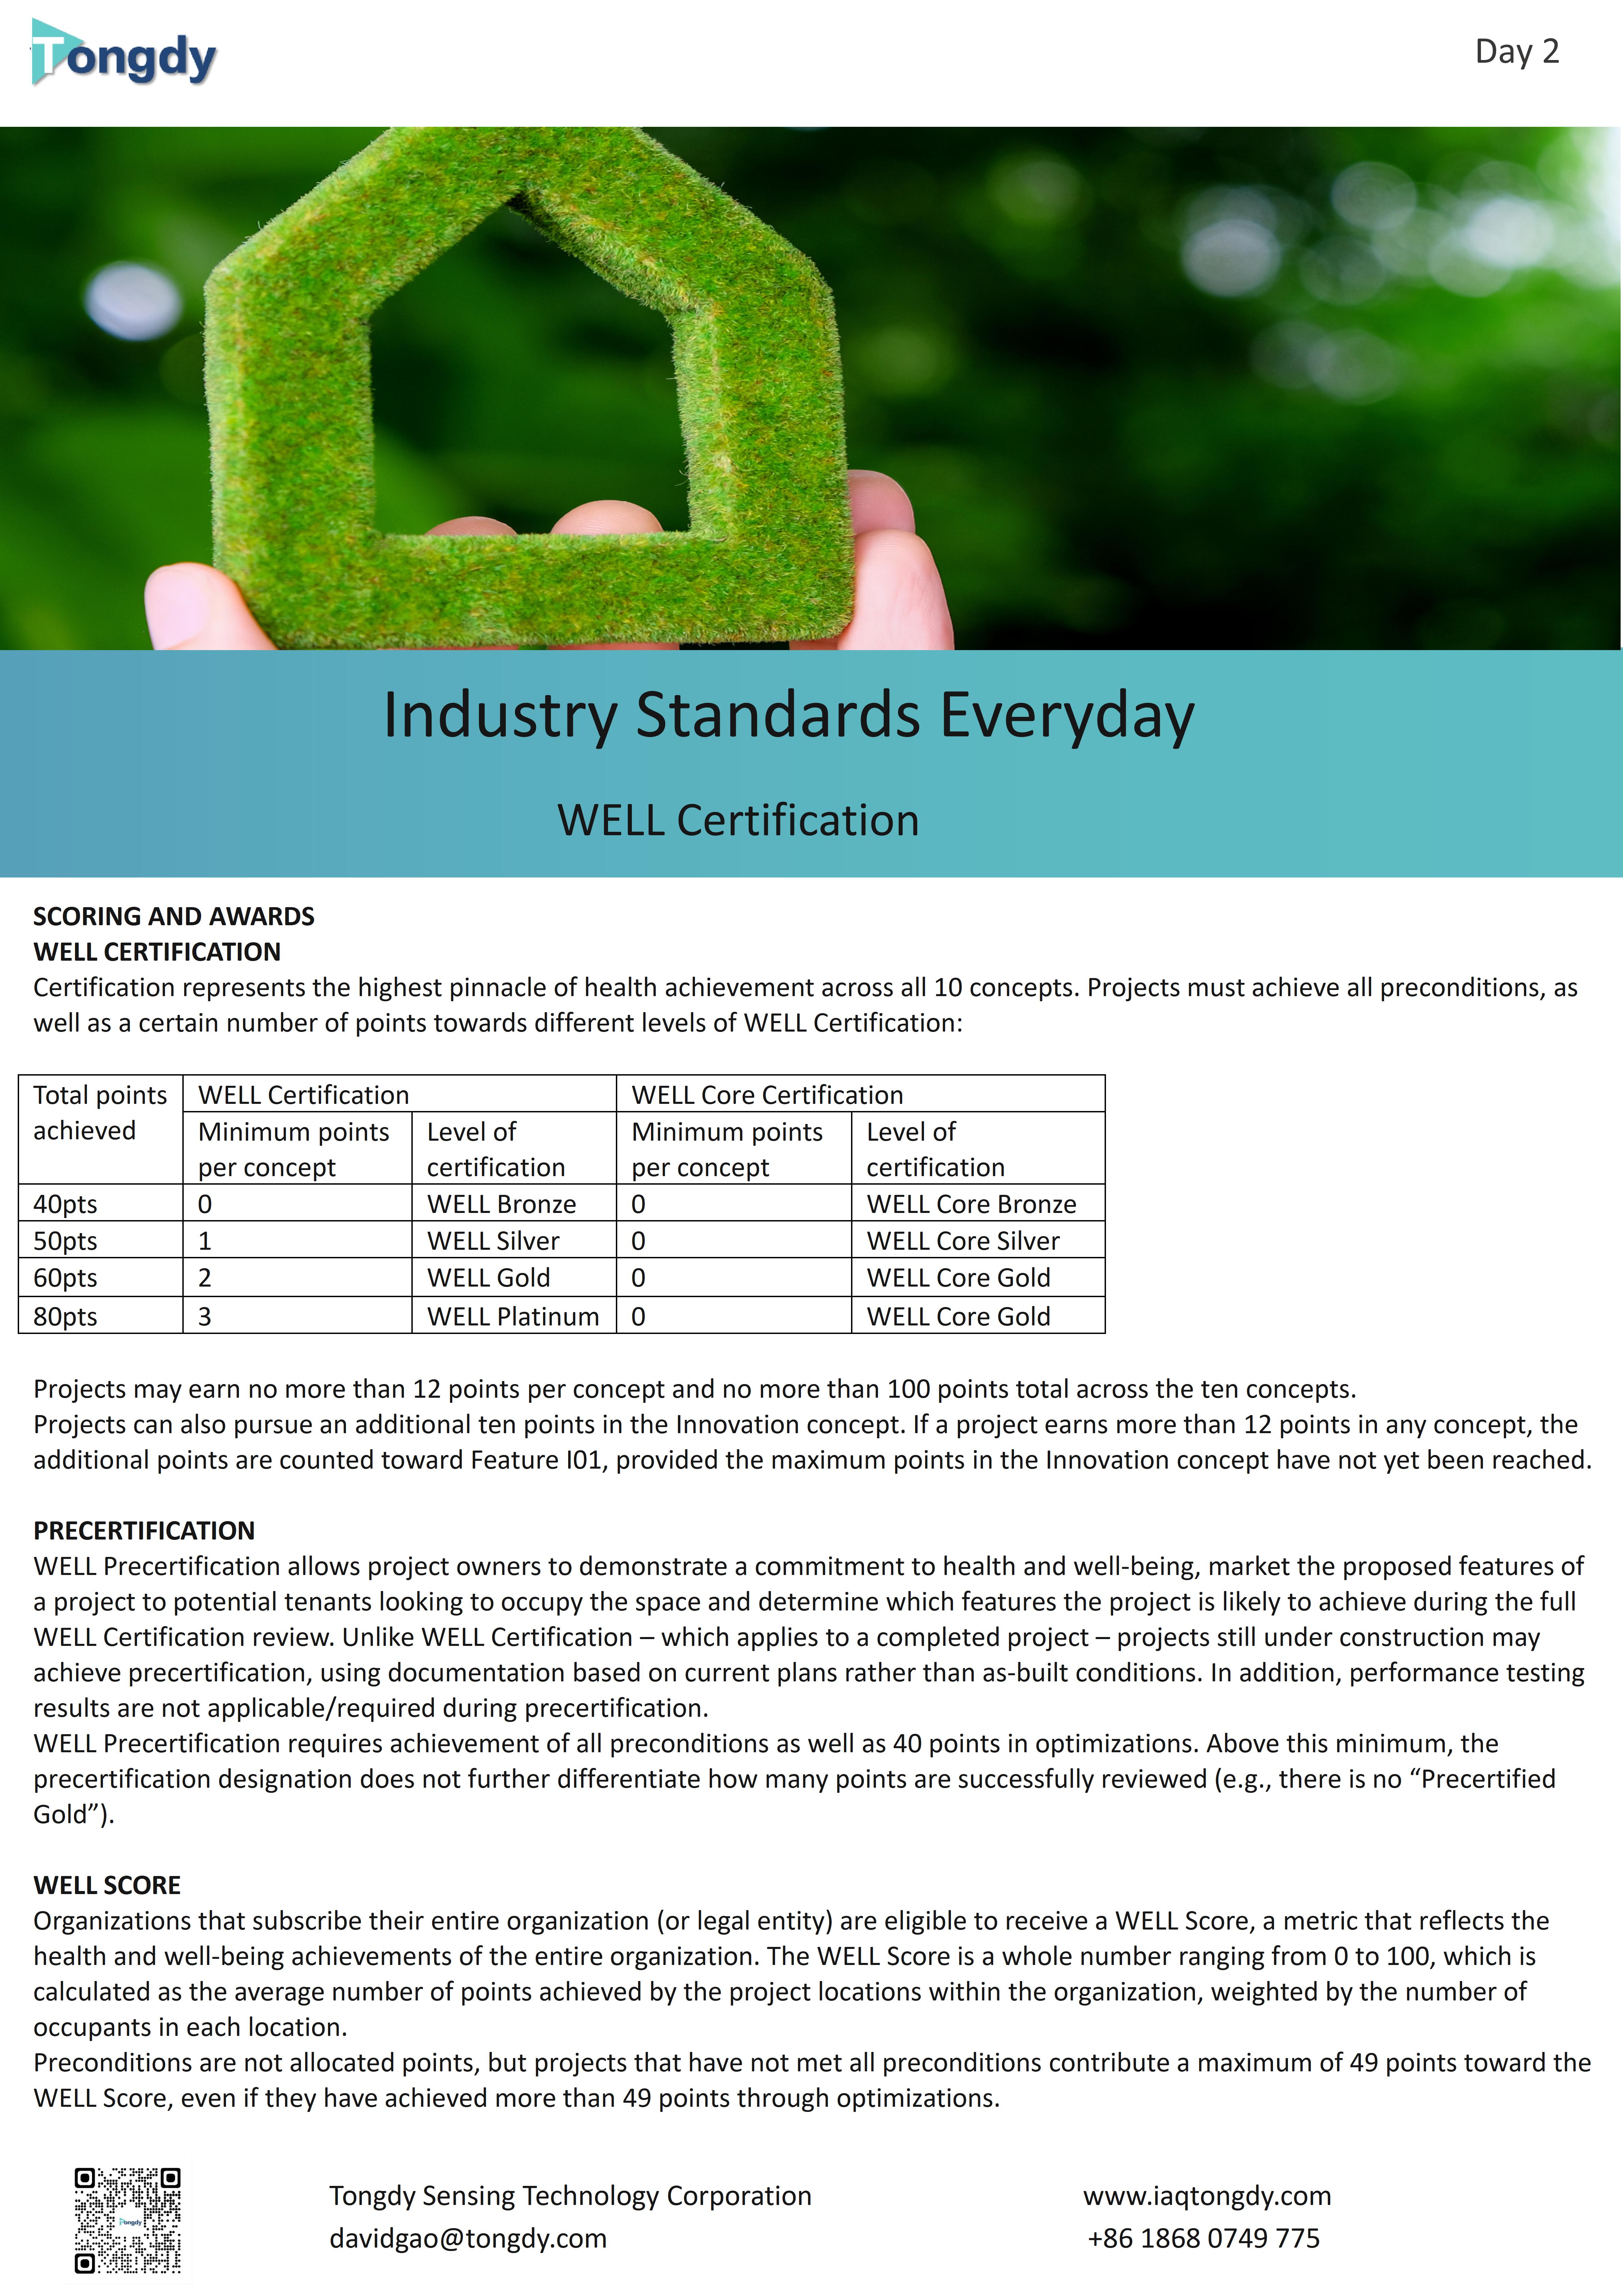 Industry Standards Everyday——WELL Certification